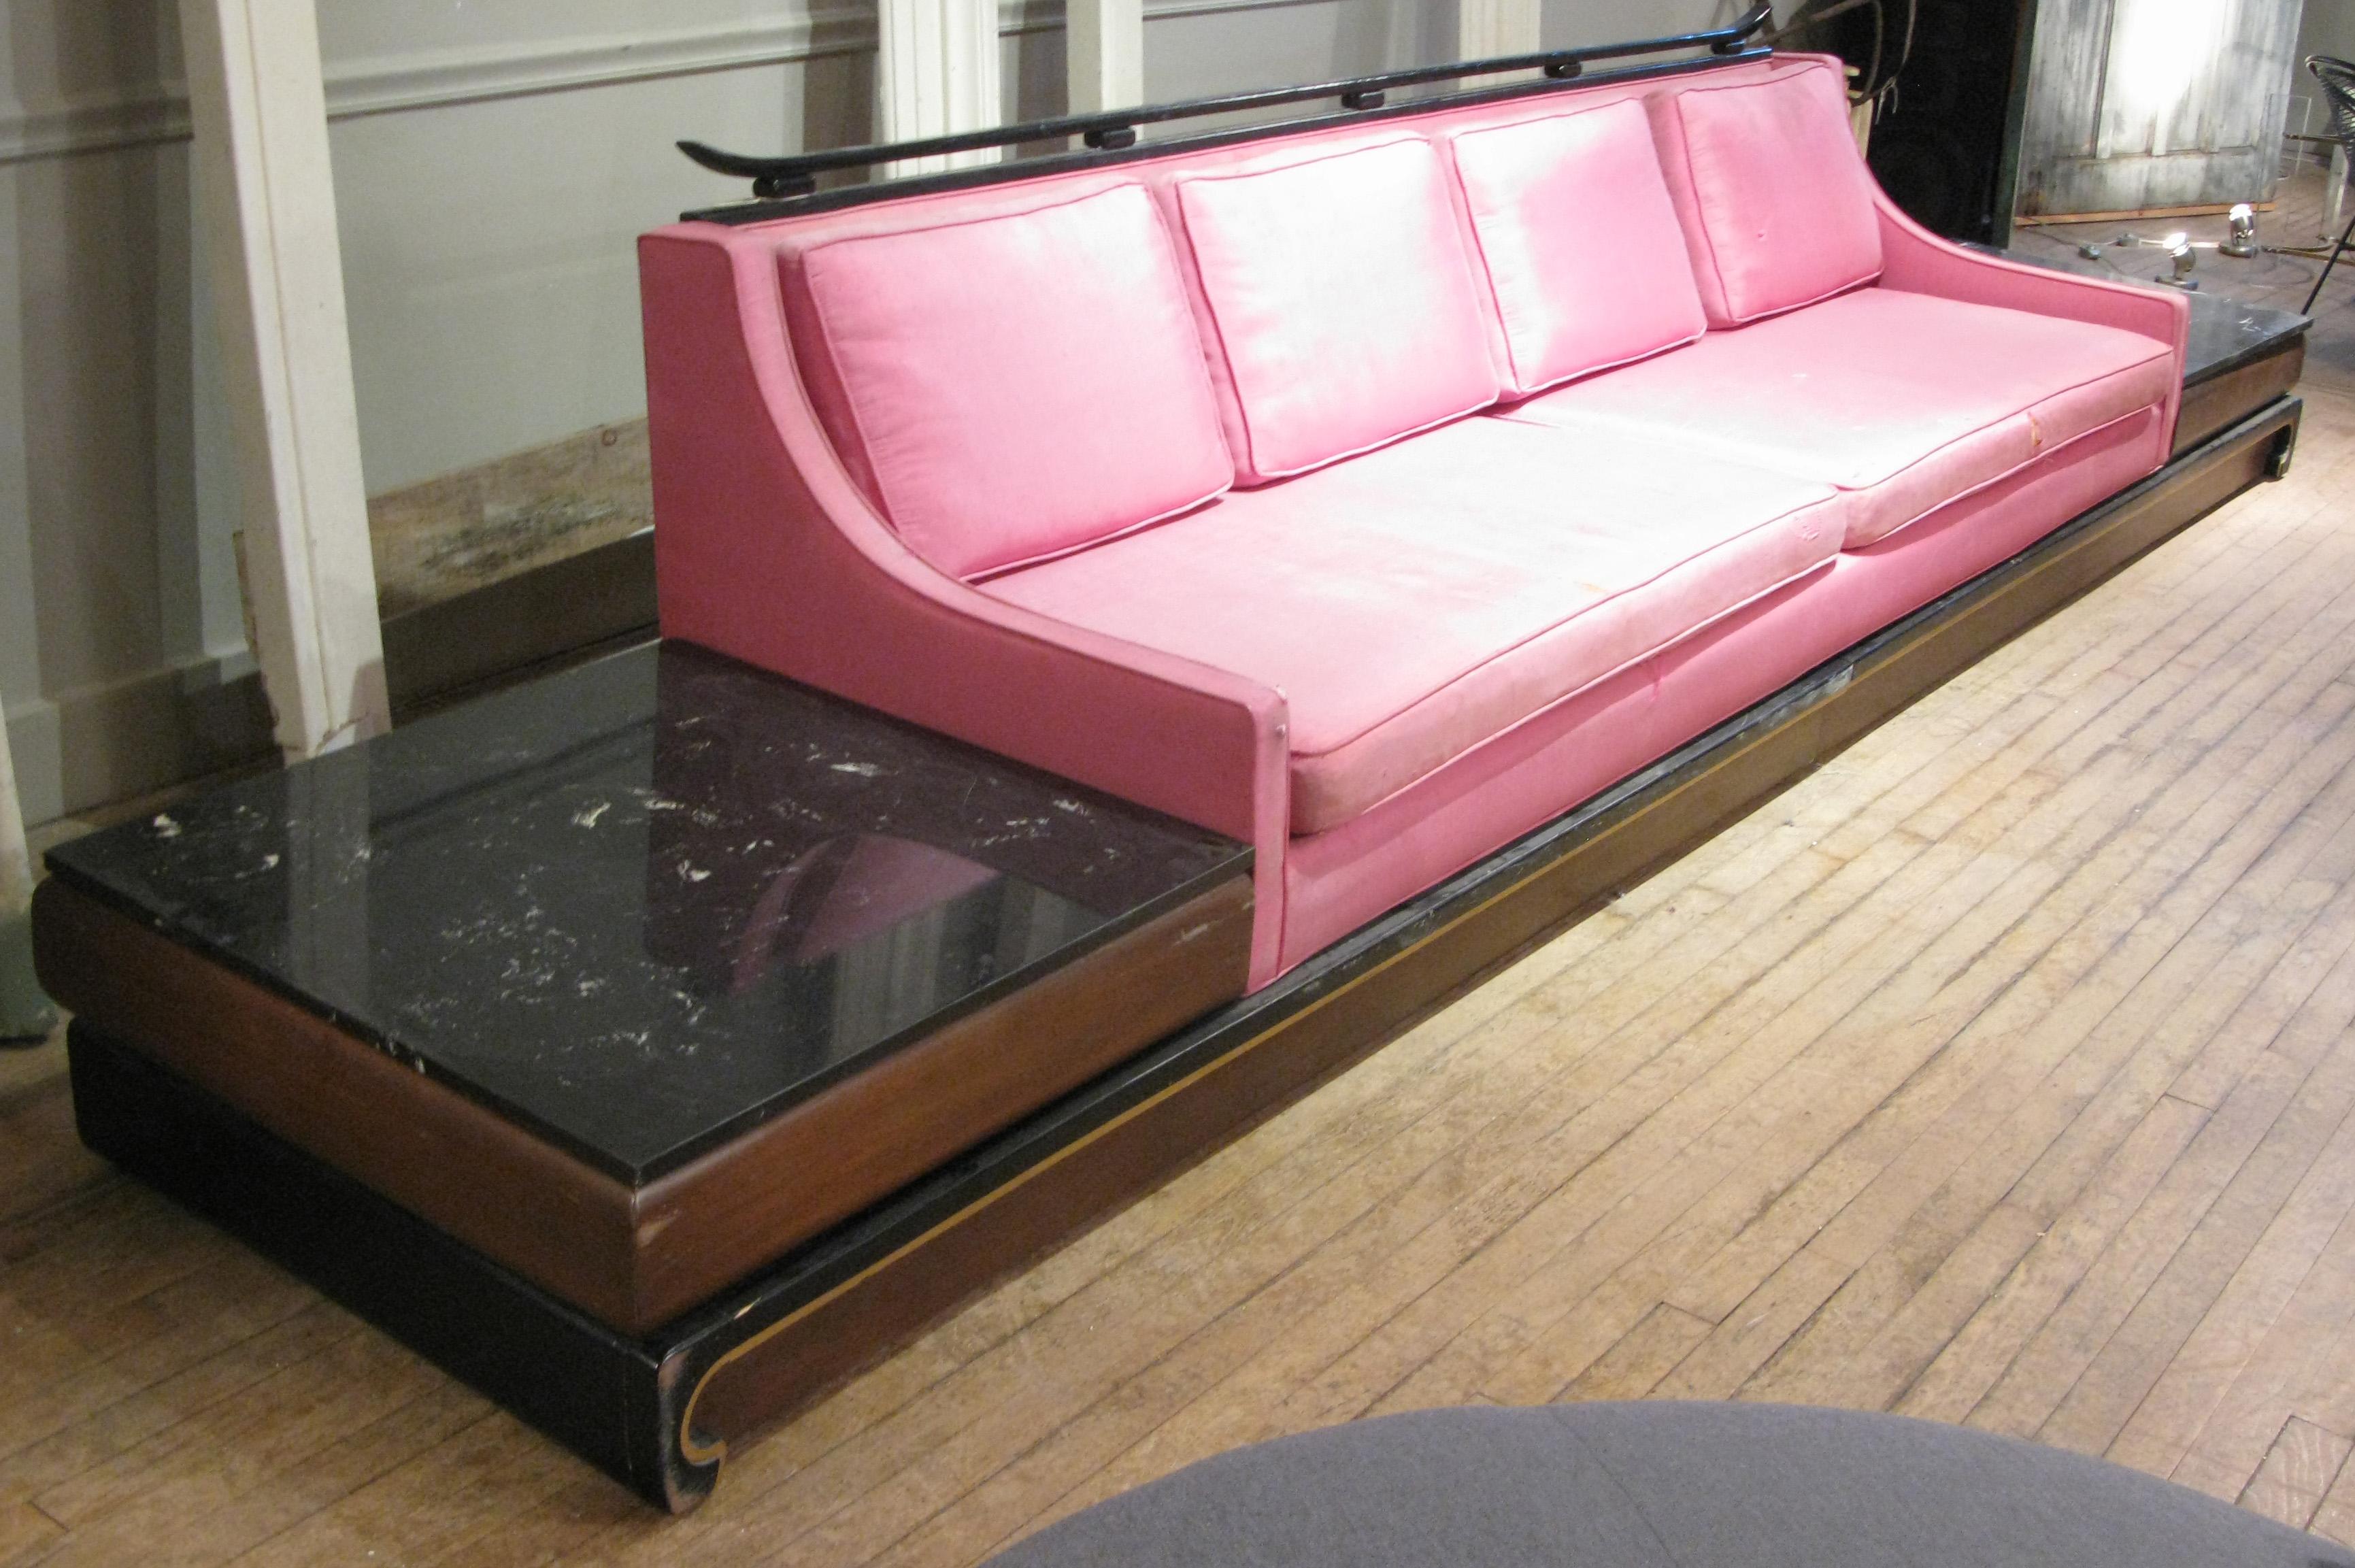 A vintage 1960s long platform base sofa with integrated marble-top tables at either end. The base and backrest have Asian inspired details. The sofa covered in its original pink silk, which will need to be redone. The frame shows age expected